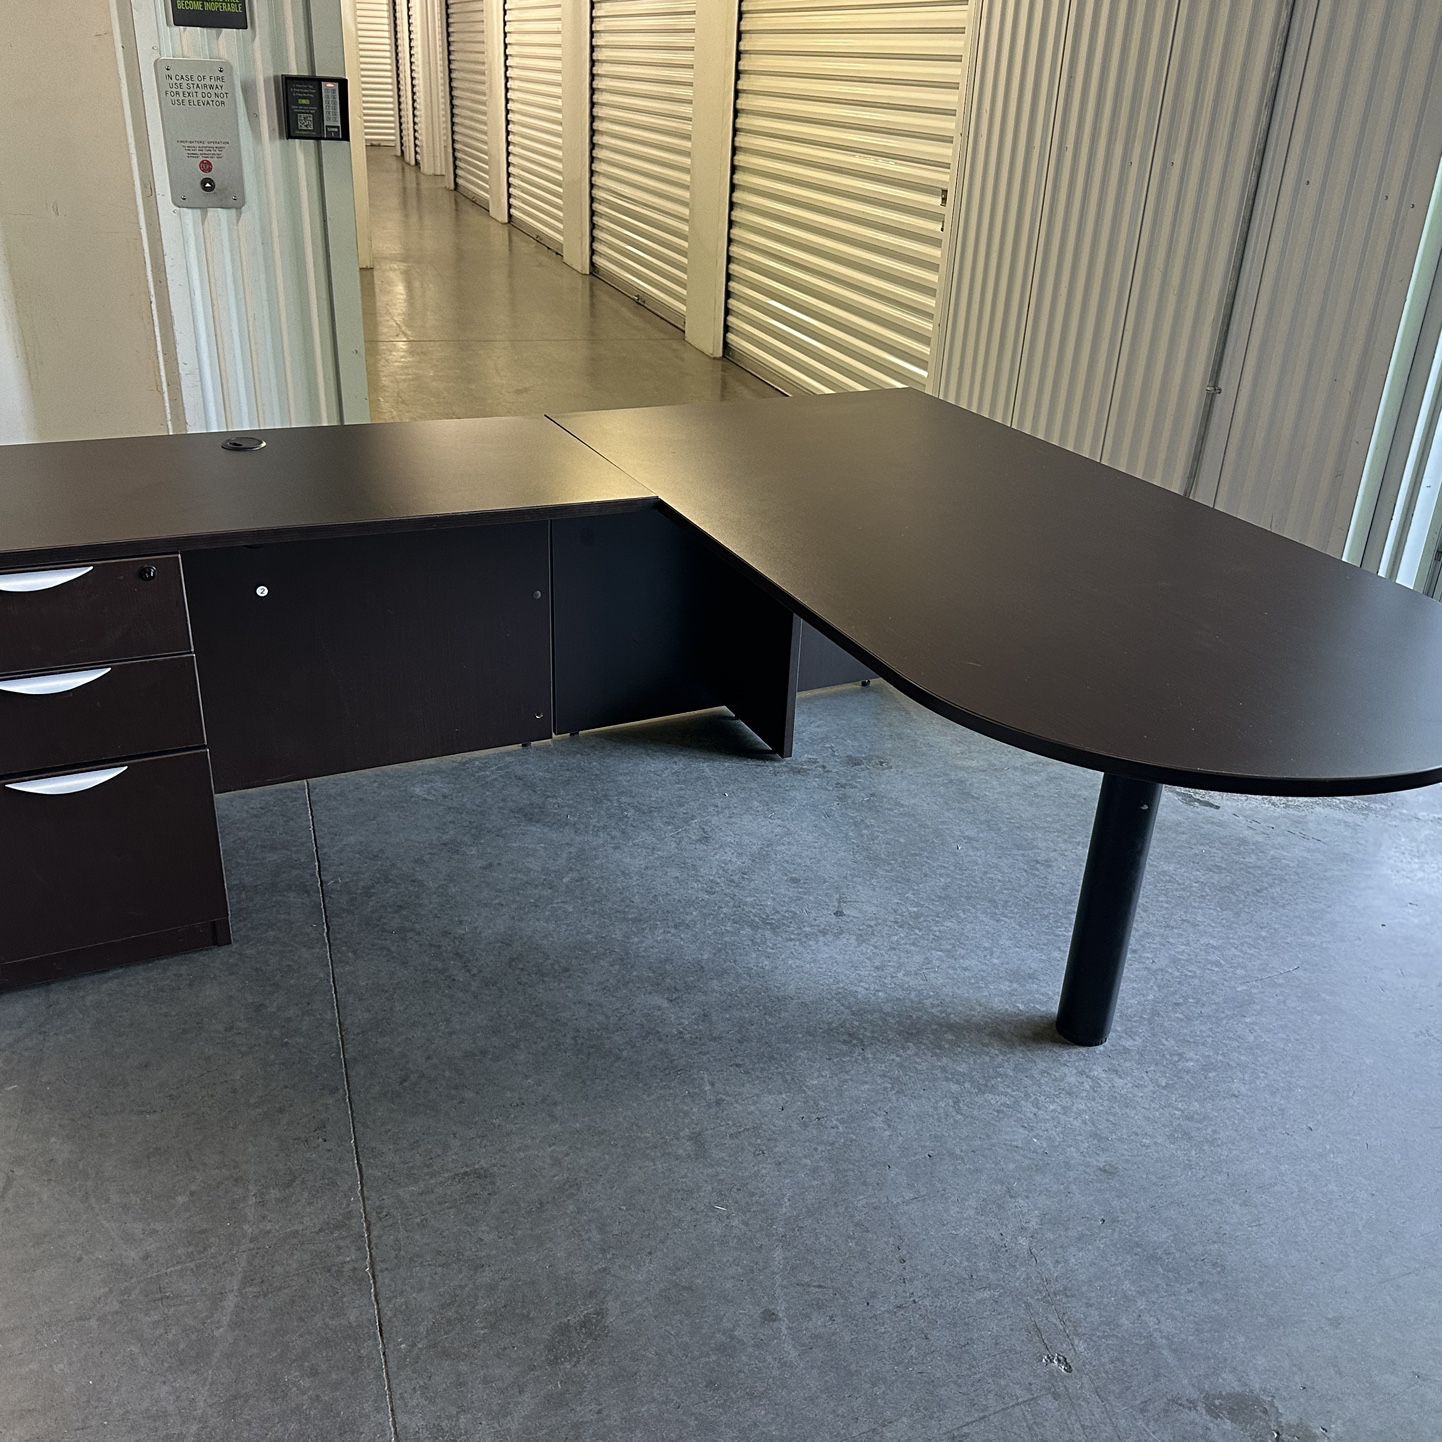 Office Furniture To Sell By Item Or All Items